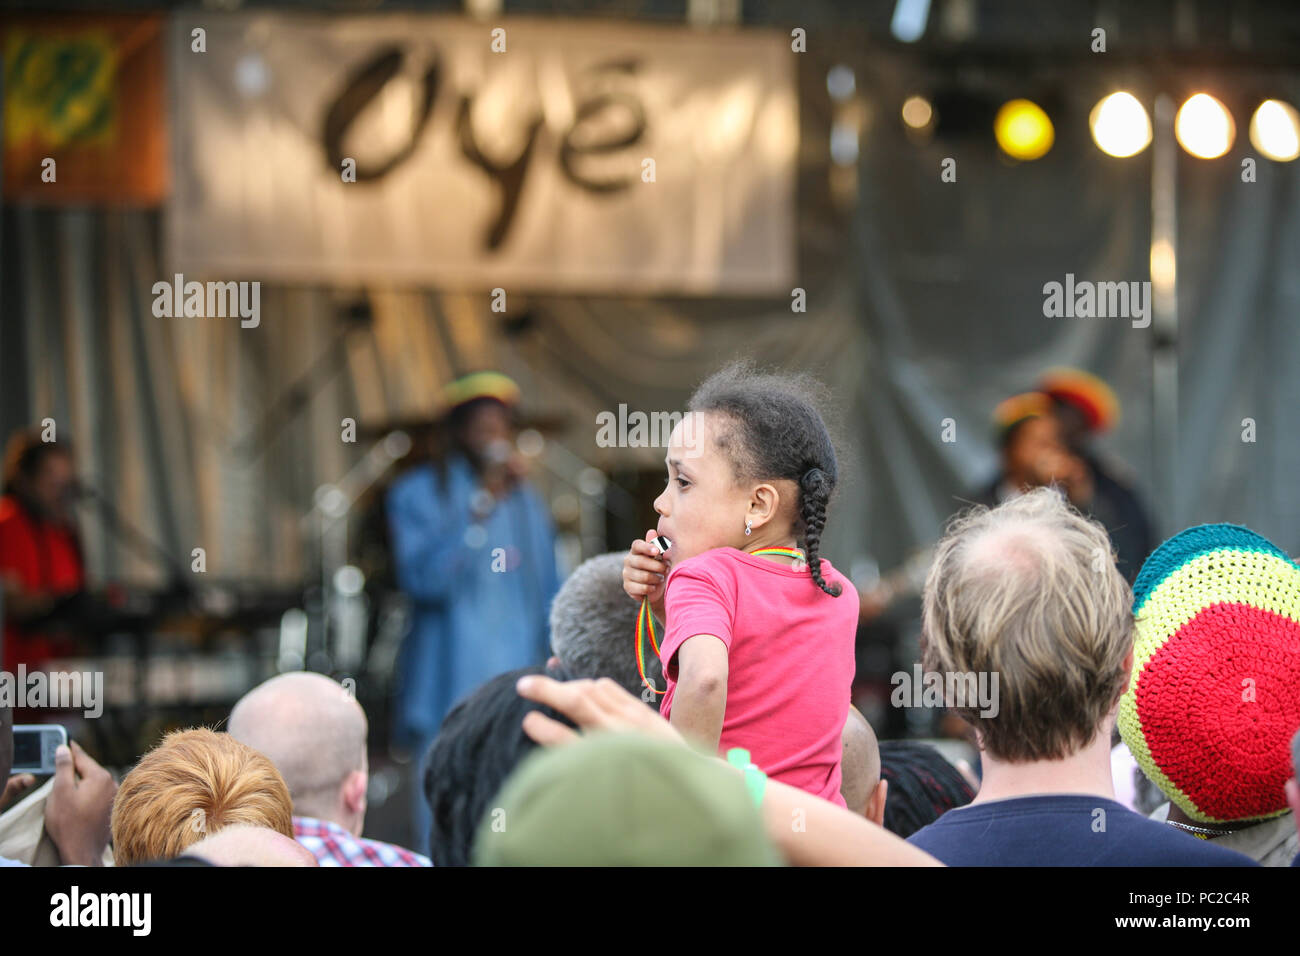 At, Africa Oye,annual,music,reggae,event held in June,Sefton Park, Liverpool.Africa Oye, advertises itself as the biggest live free African music fest Stock Photo